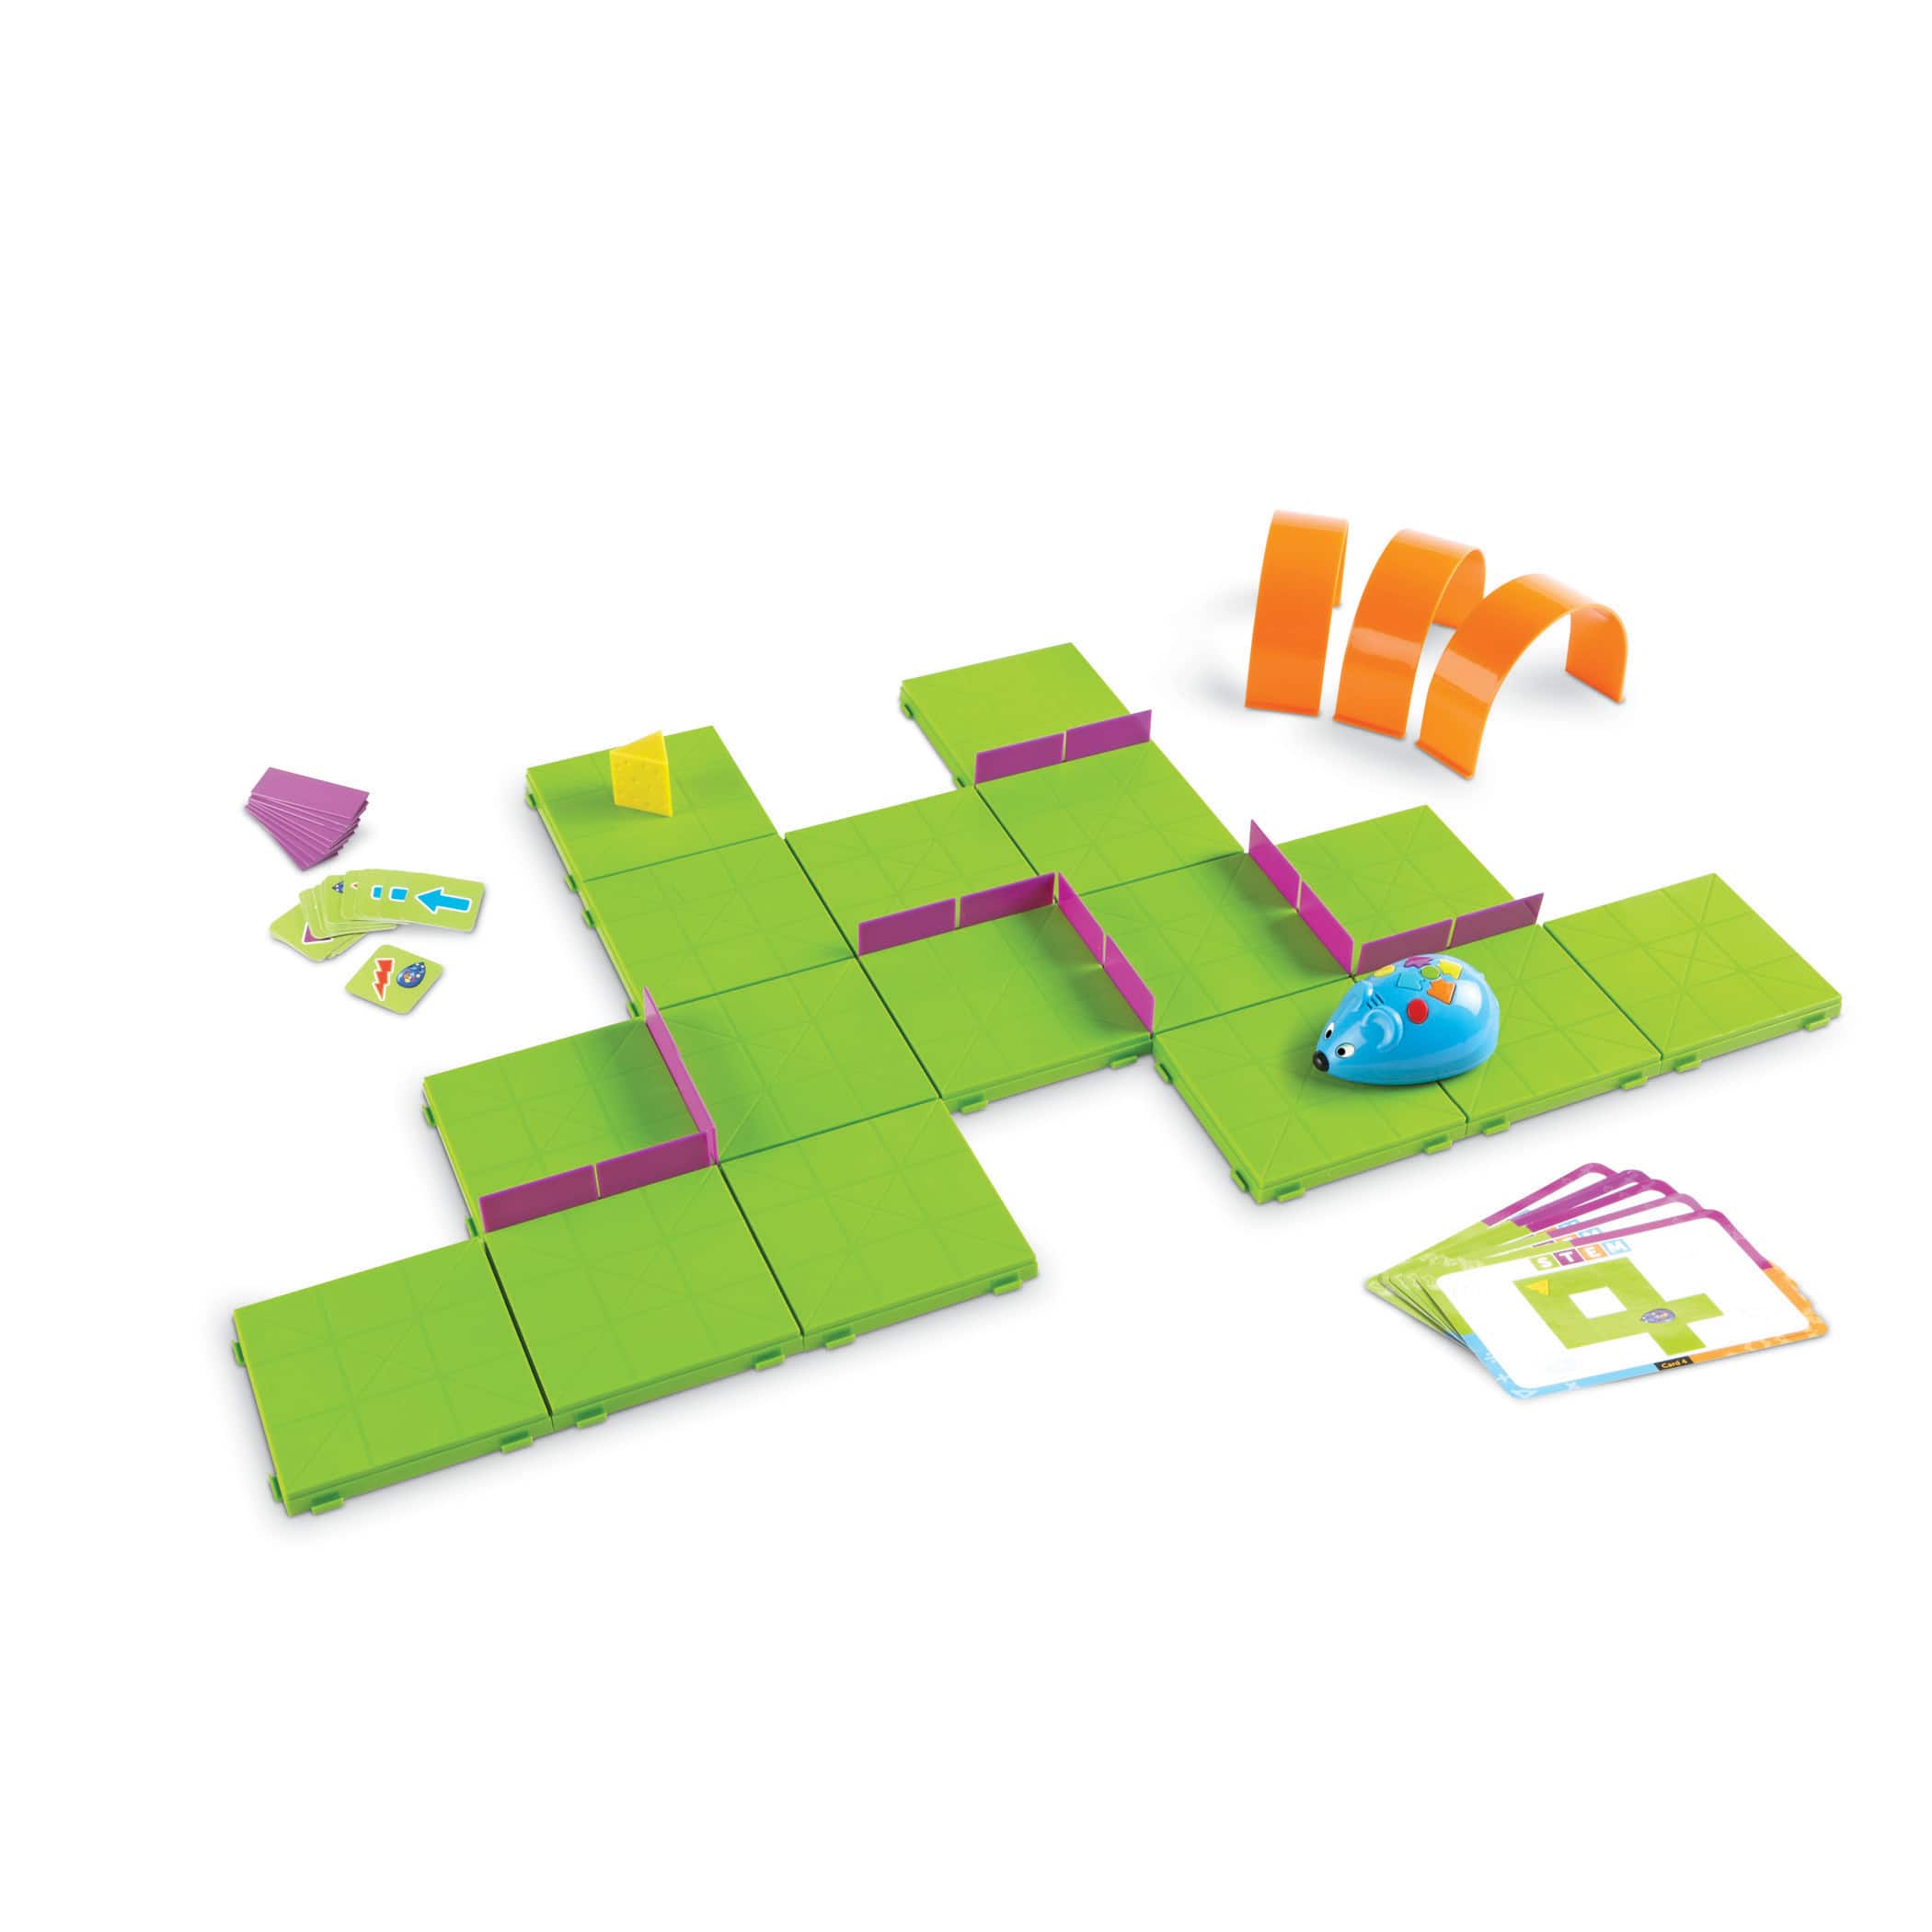 Code and Go&#x2122; Robot Mouse Activity Set